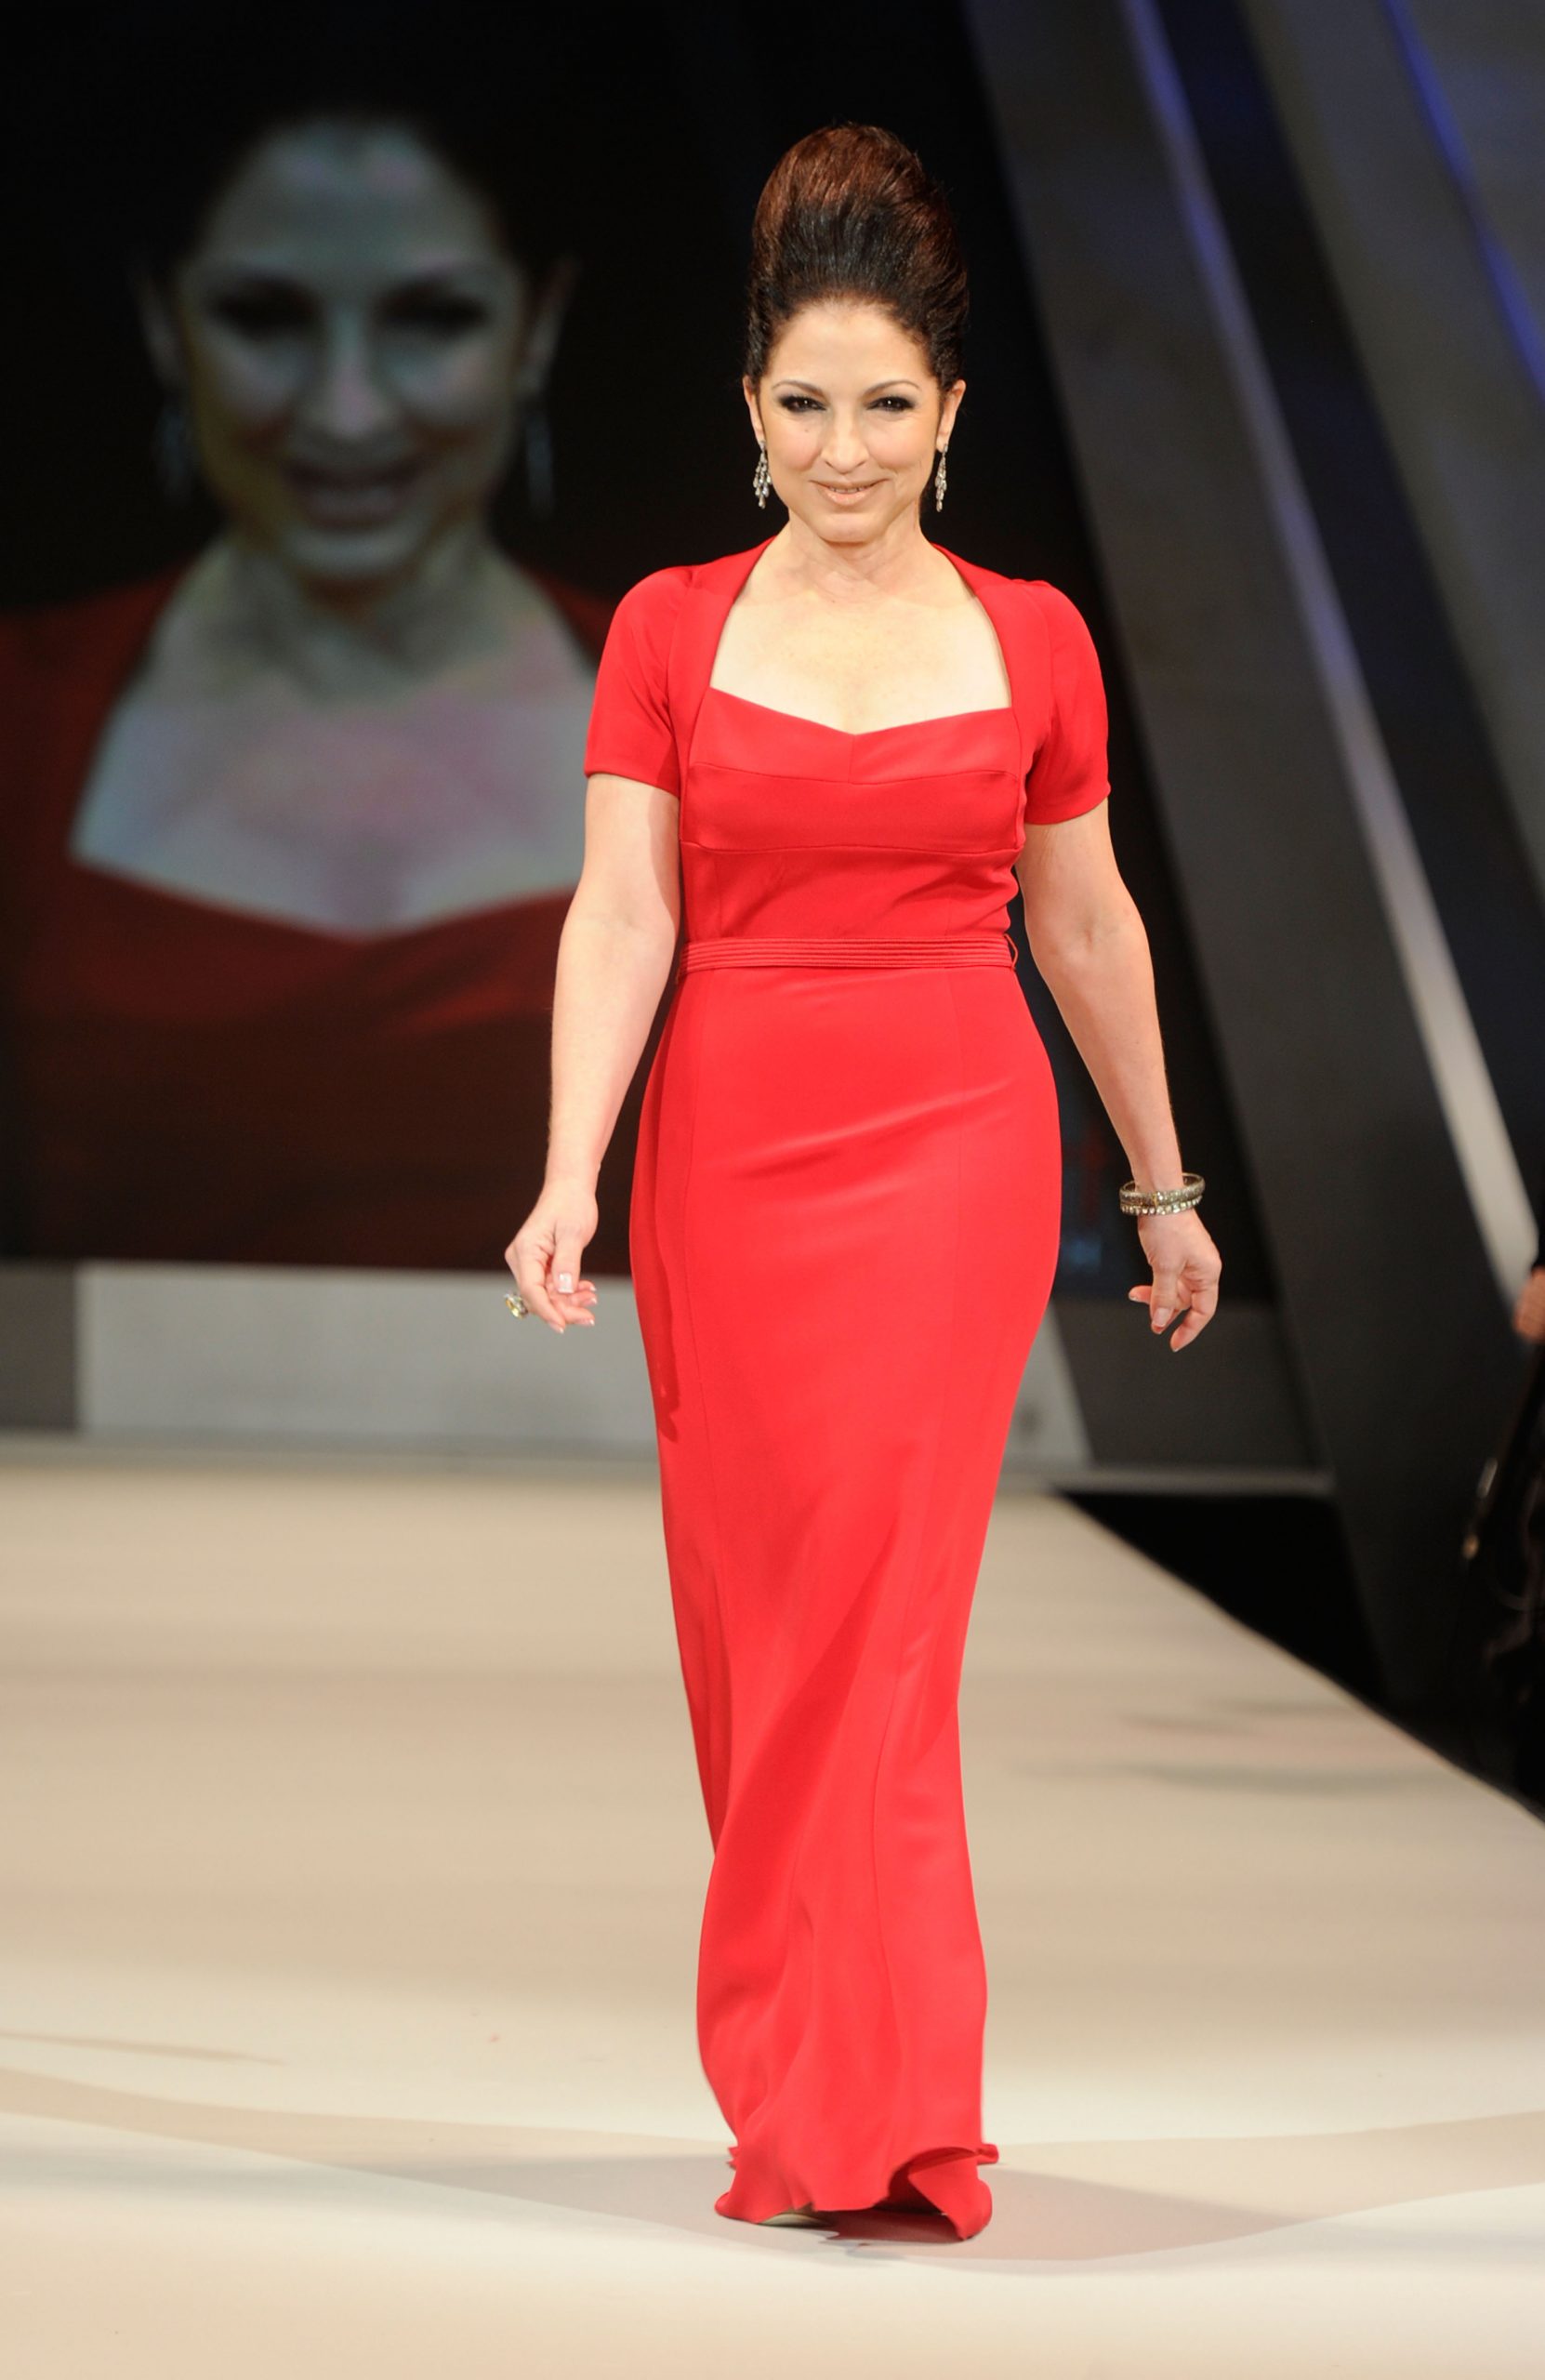 The Heart Truth’s  Red Dress Collection 2012 Fashion Show – Runway